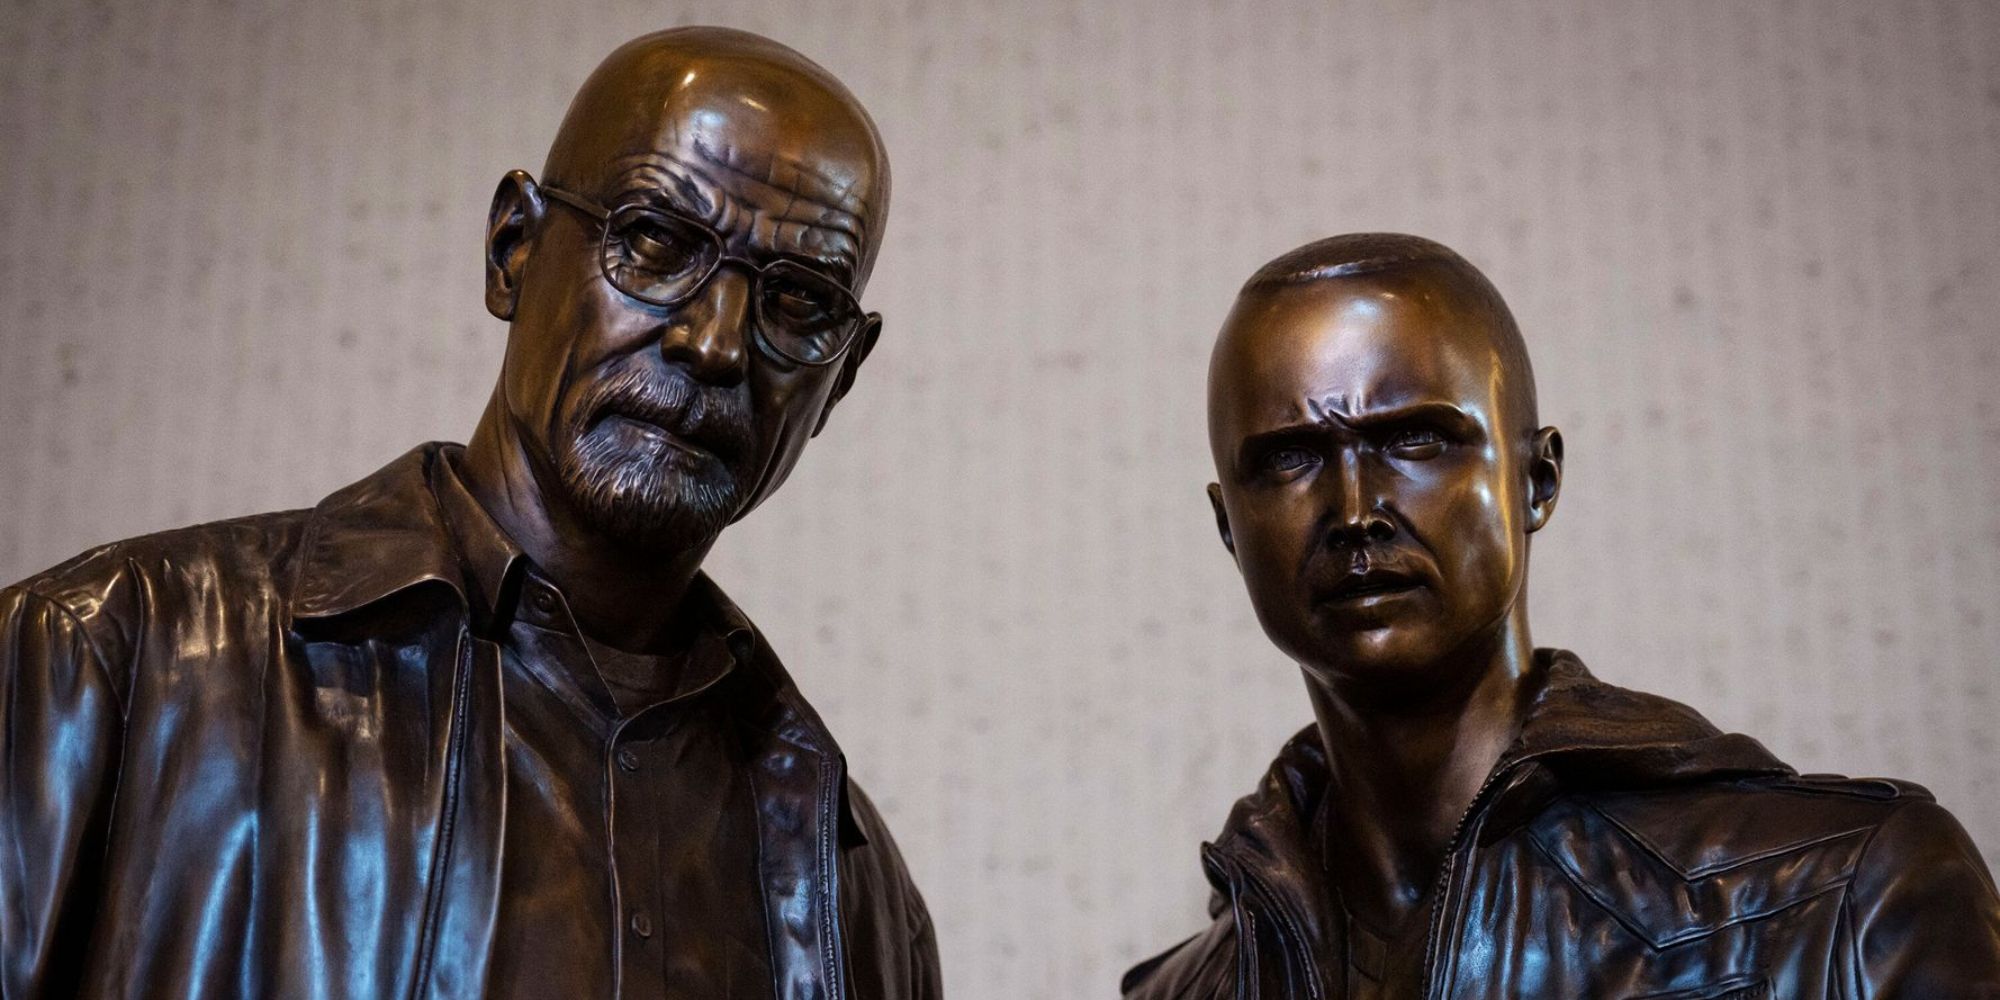 Bronze statues of Walter White and Jesse Pinkman